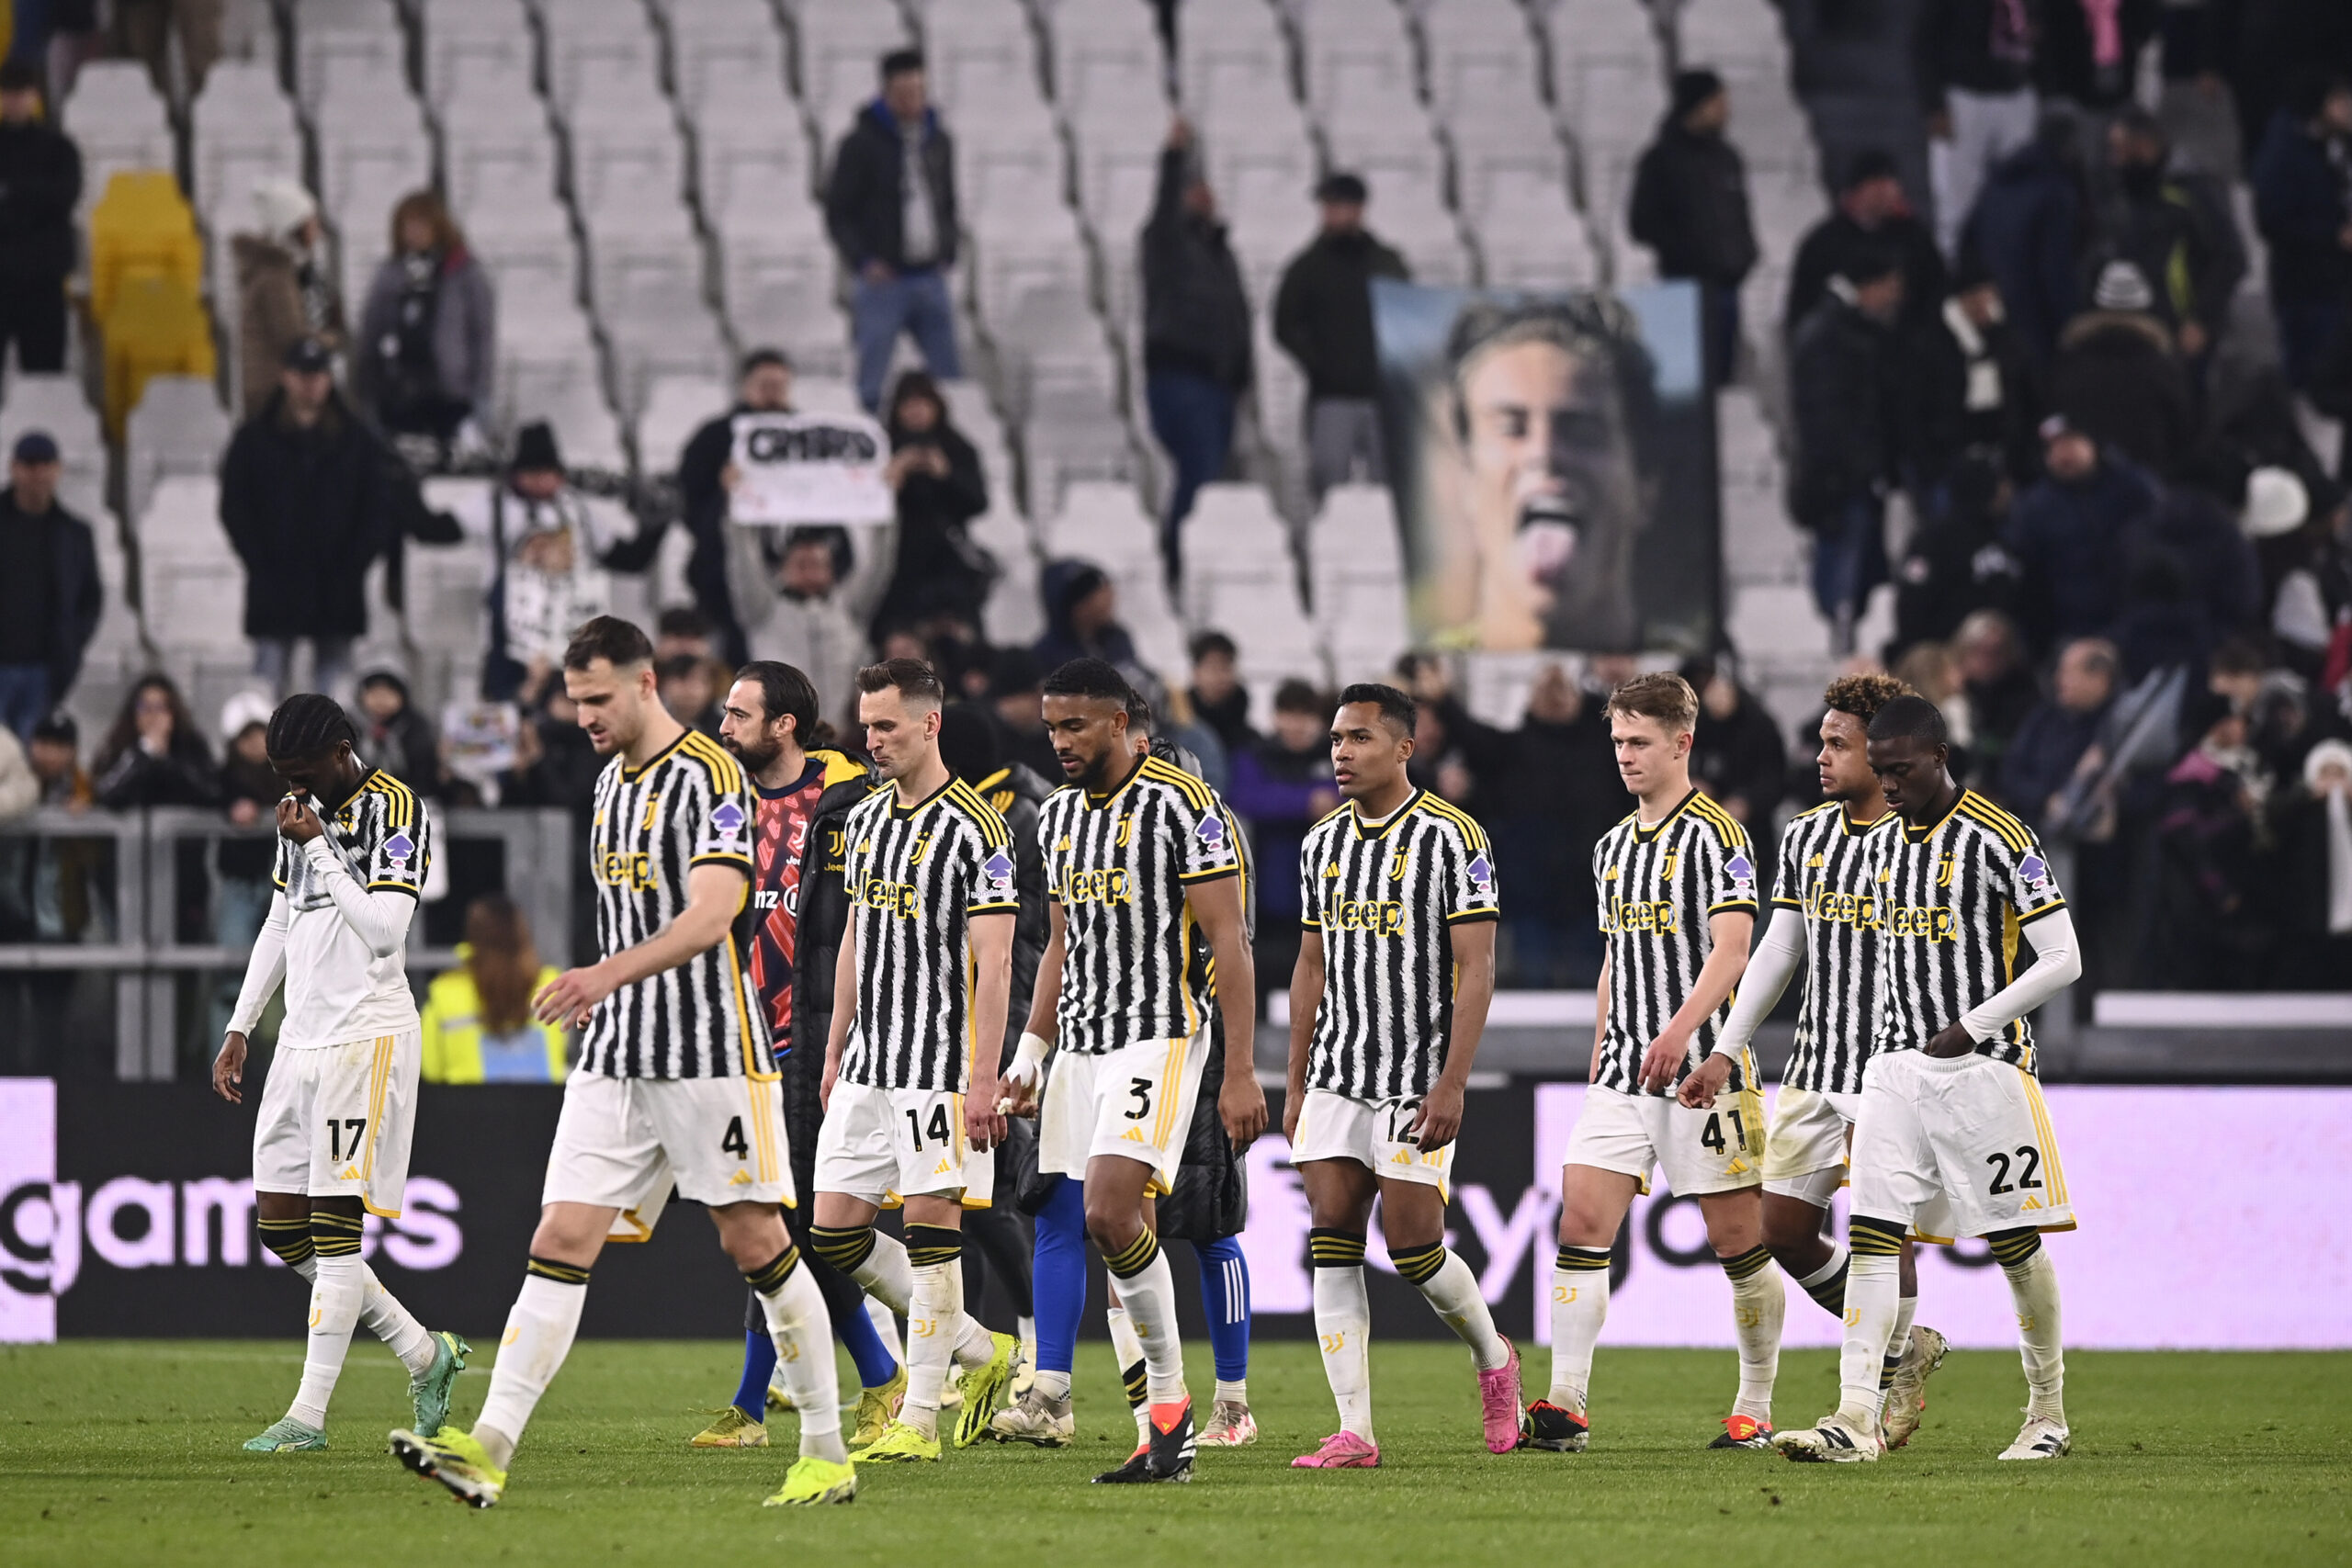 Juve stunned as Udinese hand Inter title gift